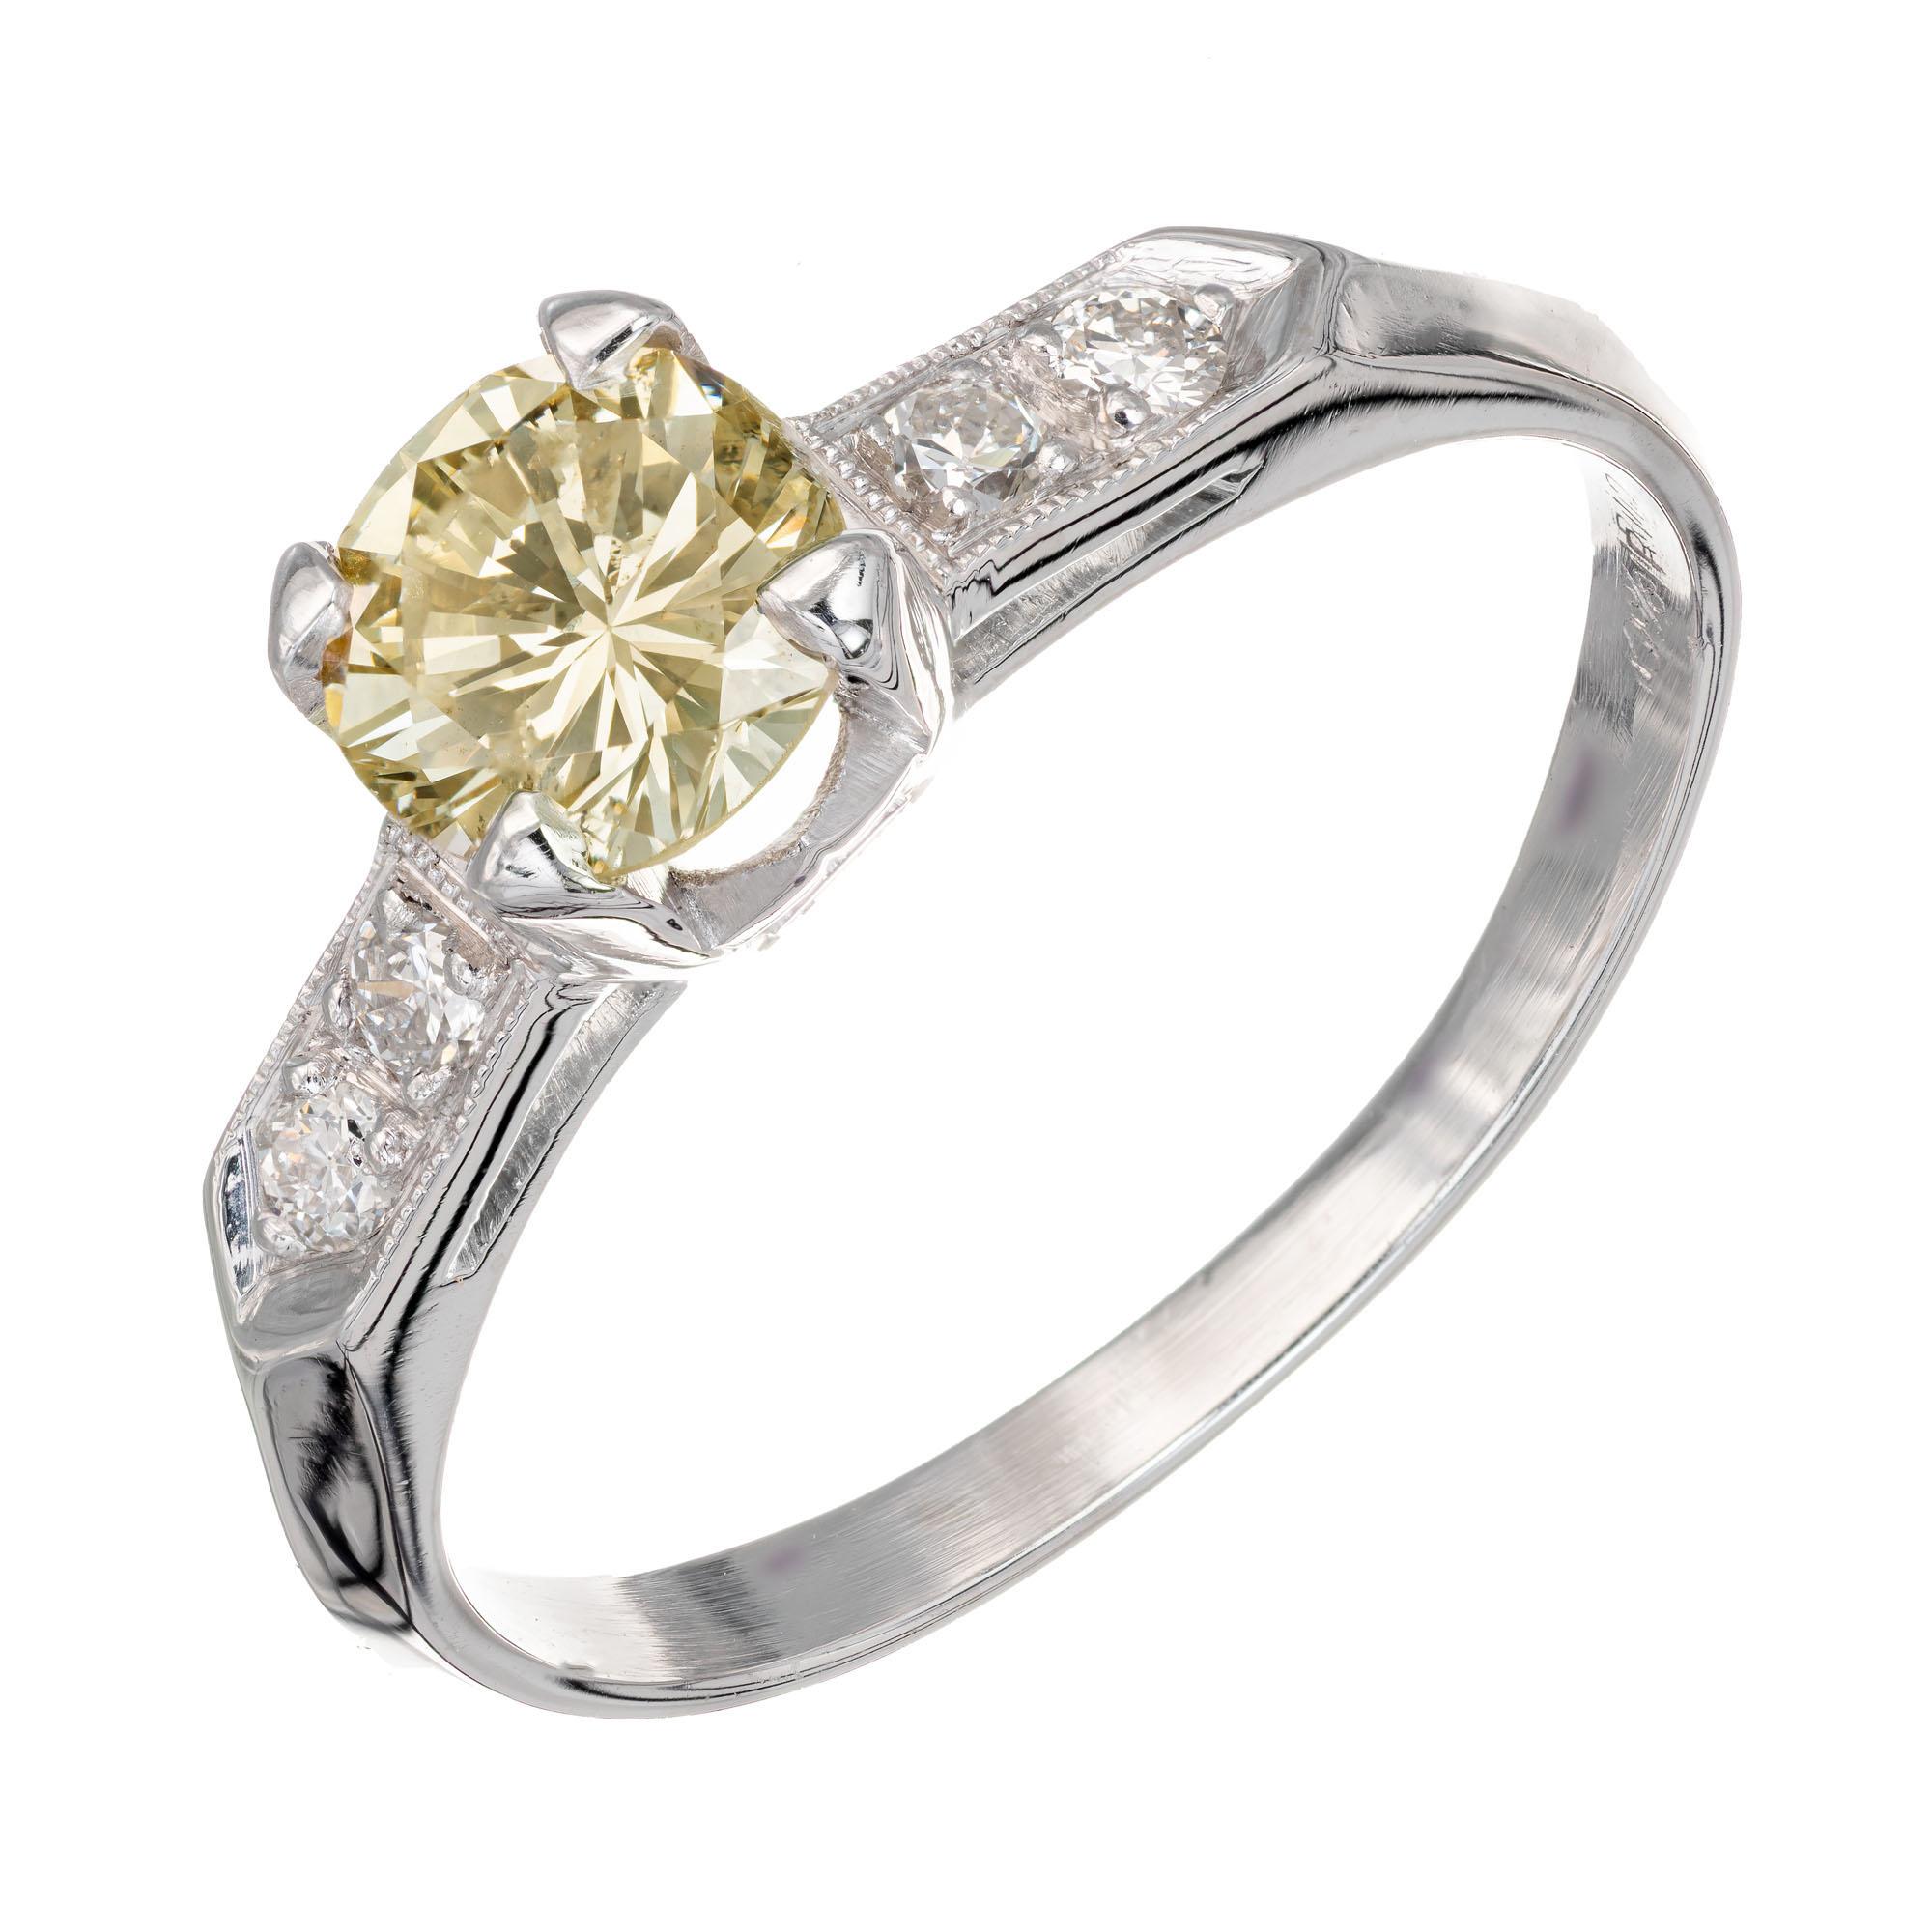 Vintage 1950's fancy natural light brownish yellow diamond ring. GIA Certified center stone with four round accent diamond in a platinum setting. 

1 round brilliant cut light brownish yellow diamond I, approx. .77ct GIA Certificate # 1206556636
4